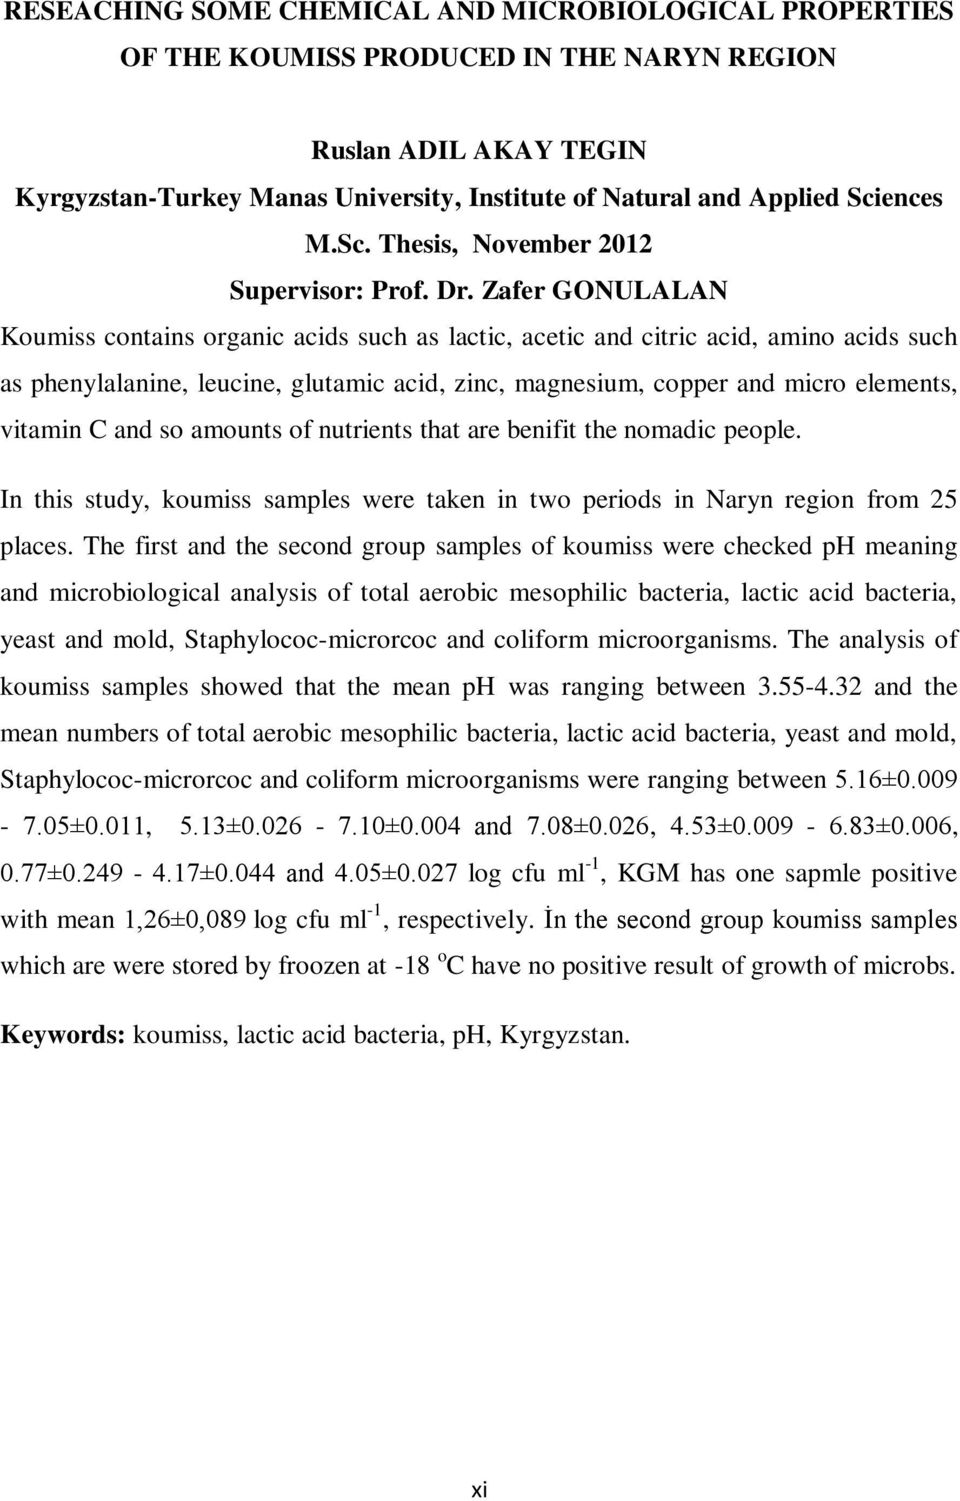 Zafer GONULALAN Koumiss contains organic acids such as lactic, acetic and citric acid, amino acids such as phenylalanine, leucine, glutamic acid, zinc, magnesium, copper and micro elements, vitamin C